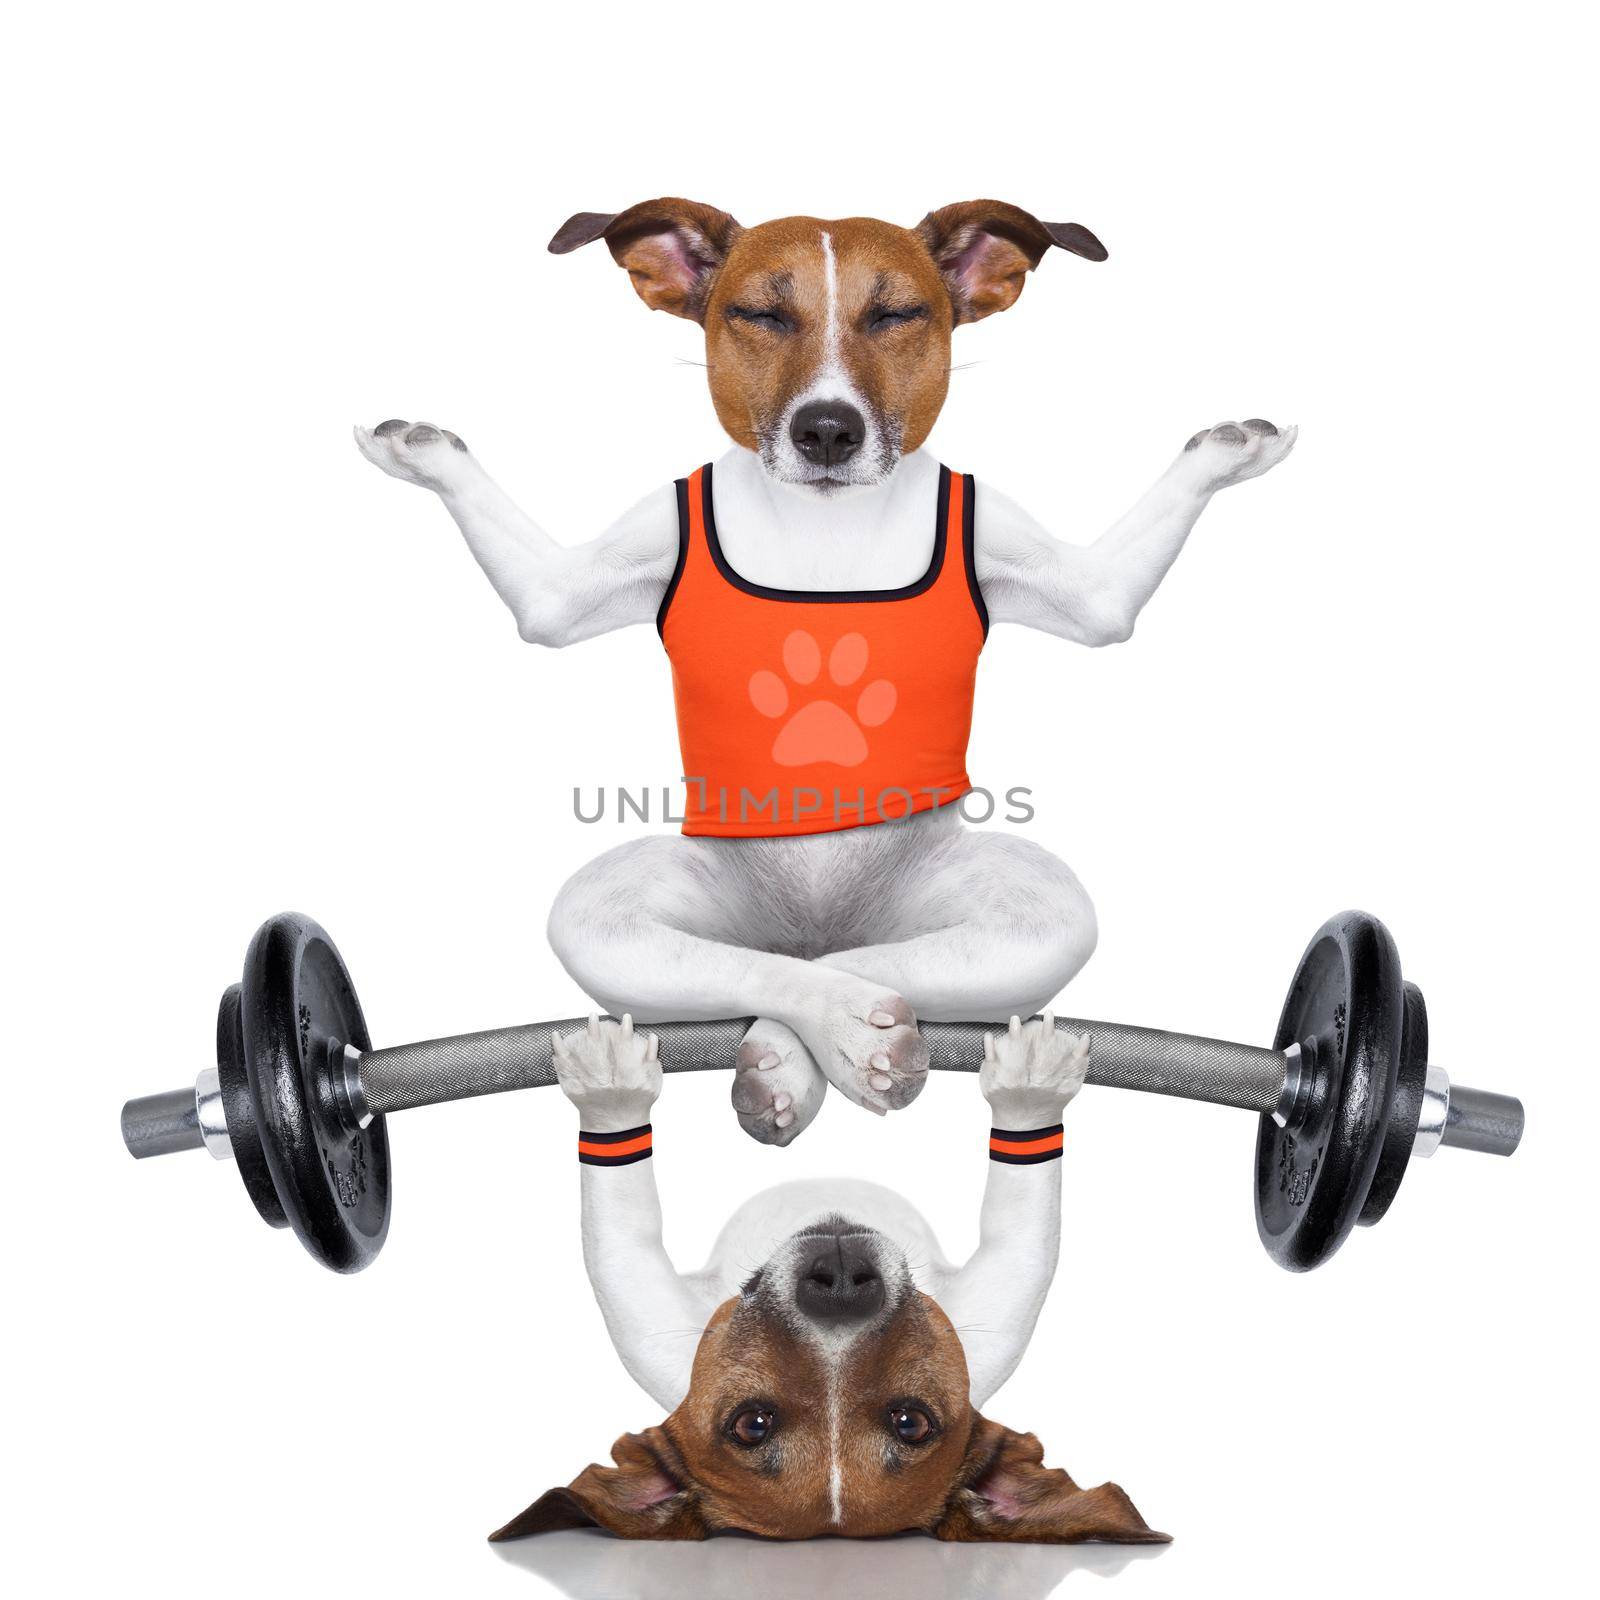 personal trainer dog and yoga dog by Brosch